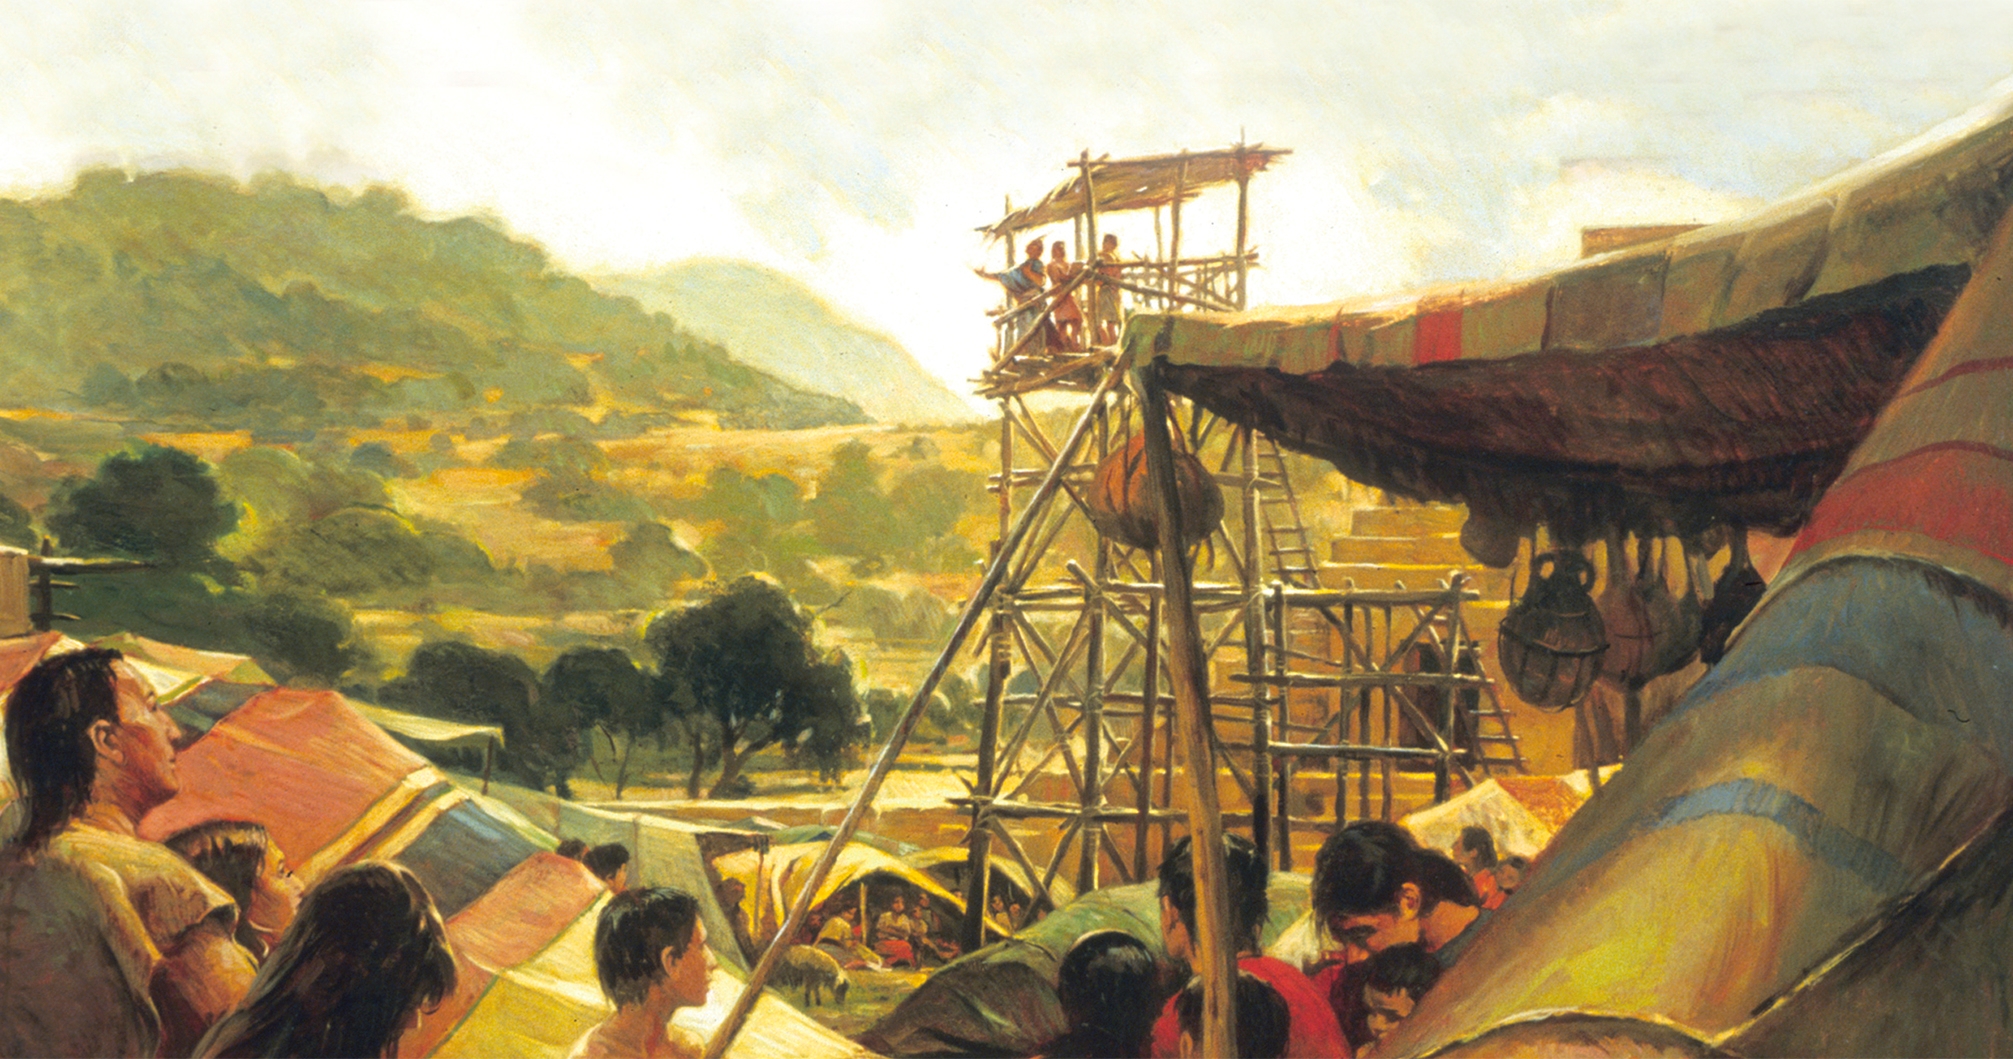 Large out door scene with a market square/campsite in the foreground and green hills in the background.  In the right foreground there is the side of alarge stuped  tent;  the tent has an awning supported by ropes and poles.  Hanging from the awning is a series of poles.  Underneath the awning is a mother with several children all in highly colored tunics and skirts.  In the left foreground is another family.  This family has a father with a daughter in hi lap, two women beside him (one with a child in her lap) and a young boy with no shirt.  Behind the man is another figure with a bowed head.  Threre are several other figures and tents in the picture, but they are across the ones in the foreground.  A large tower is the focus of the painting.  The tower appears like scaffolding with a shaded top.  On top of the tower are three men.  One wears a blue robe and speaks with outstretched arms.  The other two seem to be recording his words.  Behind the tower is a stone building with step shapped sides.  "Walter Ranes '03" appears in the lower right corner in red.   The Reverse side reads, "Walter Rane 2003/ In the Service of Your God Mosiah 2:17/ King Benjamin Addresses his People".